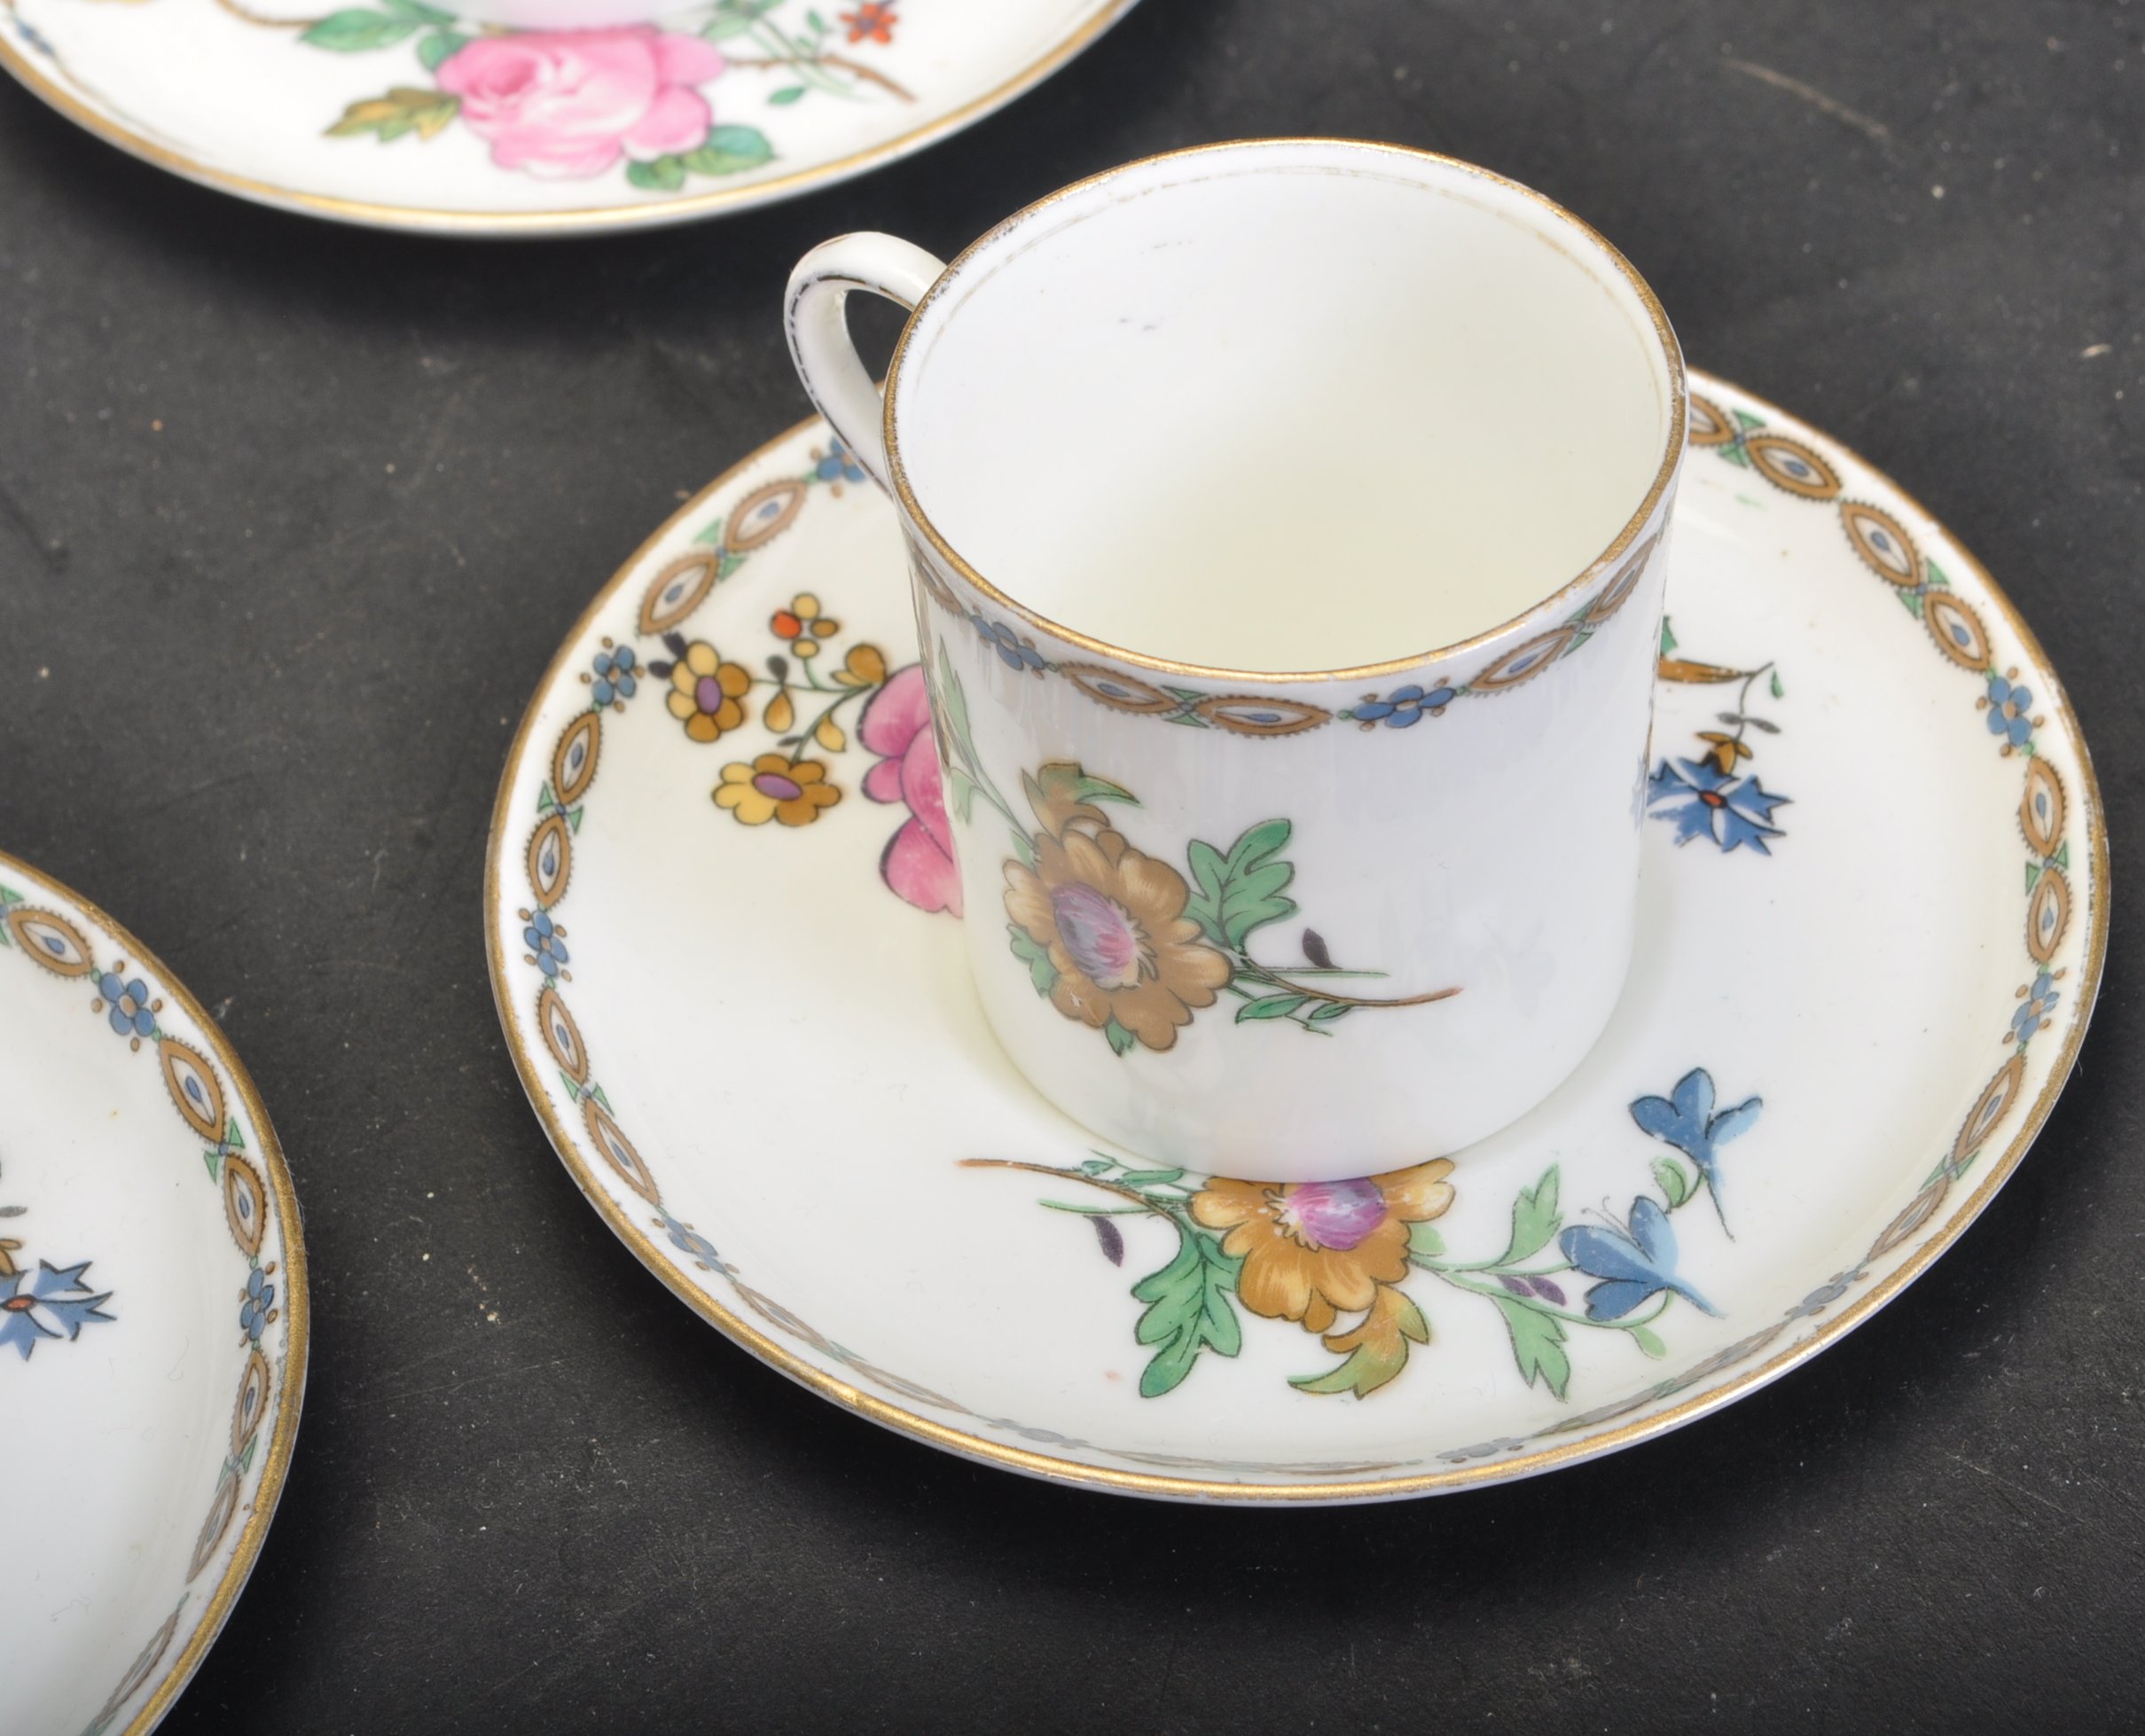 COLLECTION OF EARLY 20TH CENTURY AYNSLEY FINE BONE CHINA - Image 5 of 7